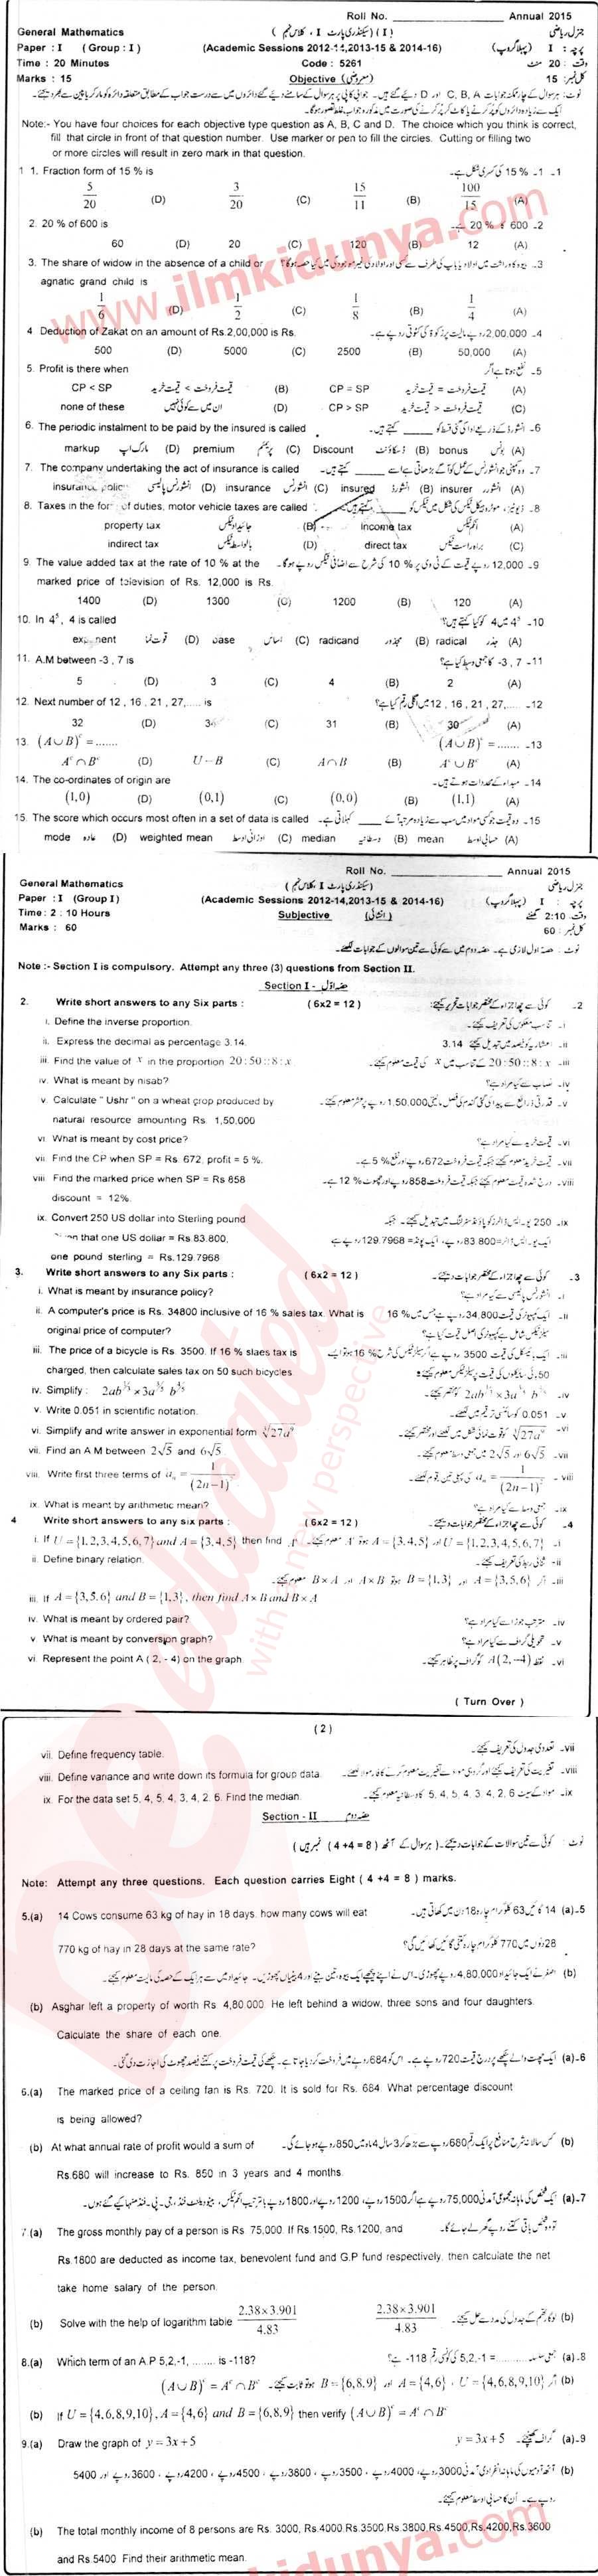 General Math 9th class Past Paper Group 1 BISE Sahiwal 2015